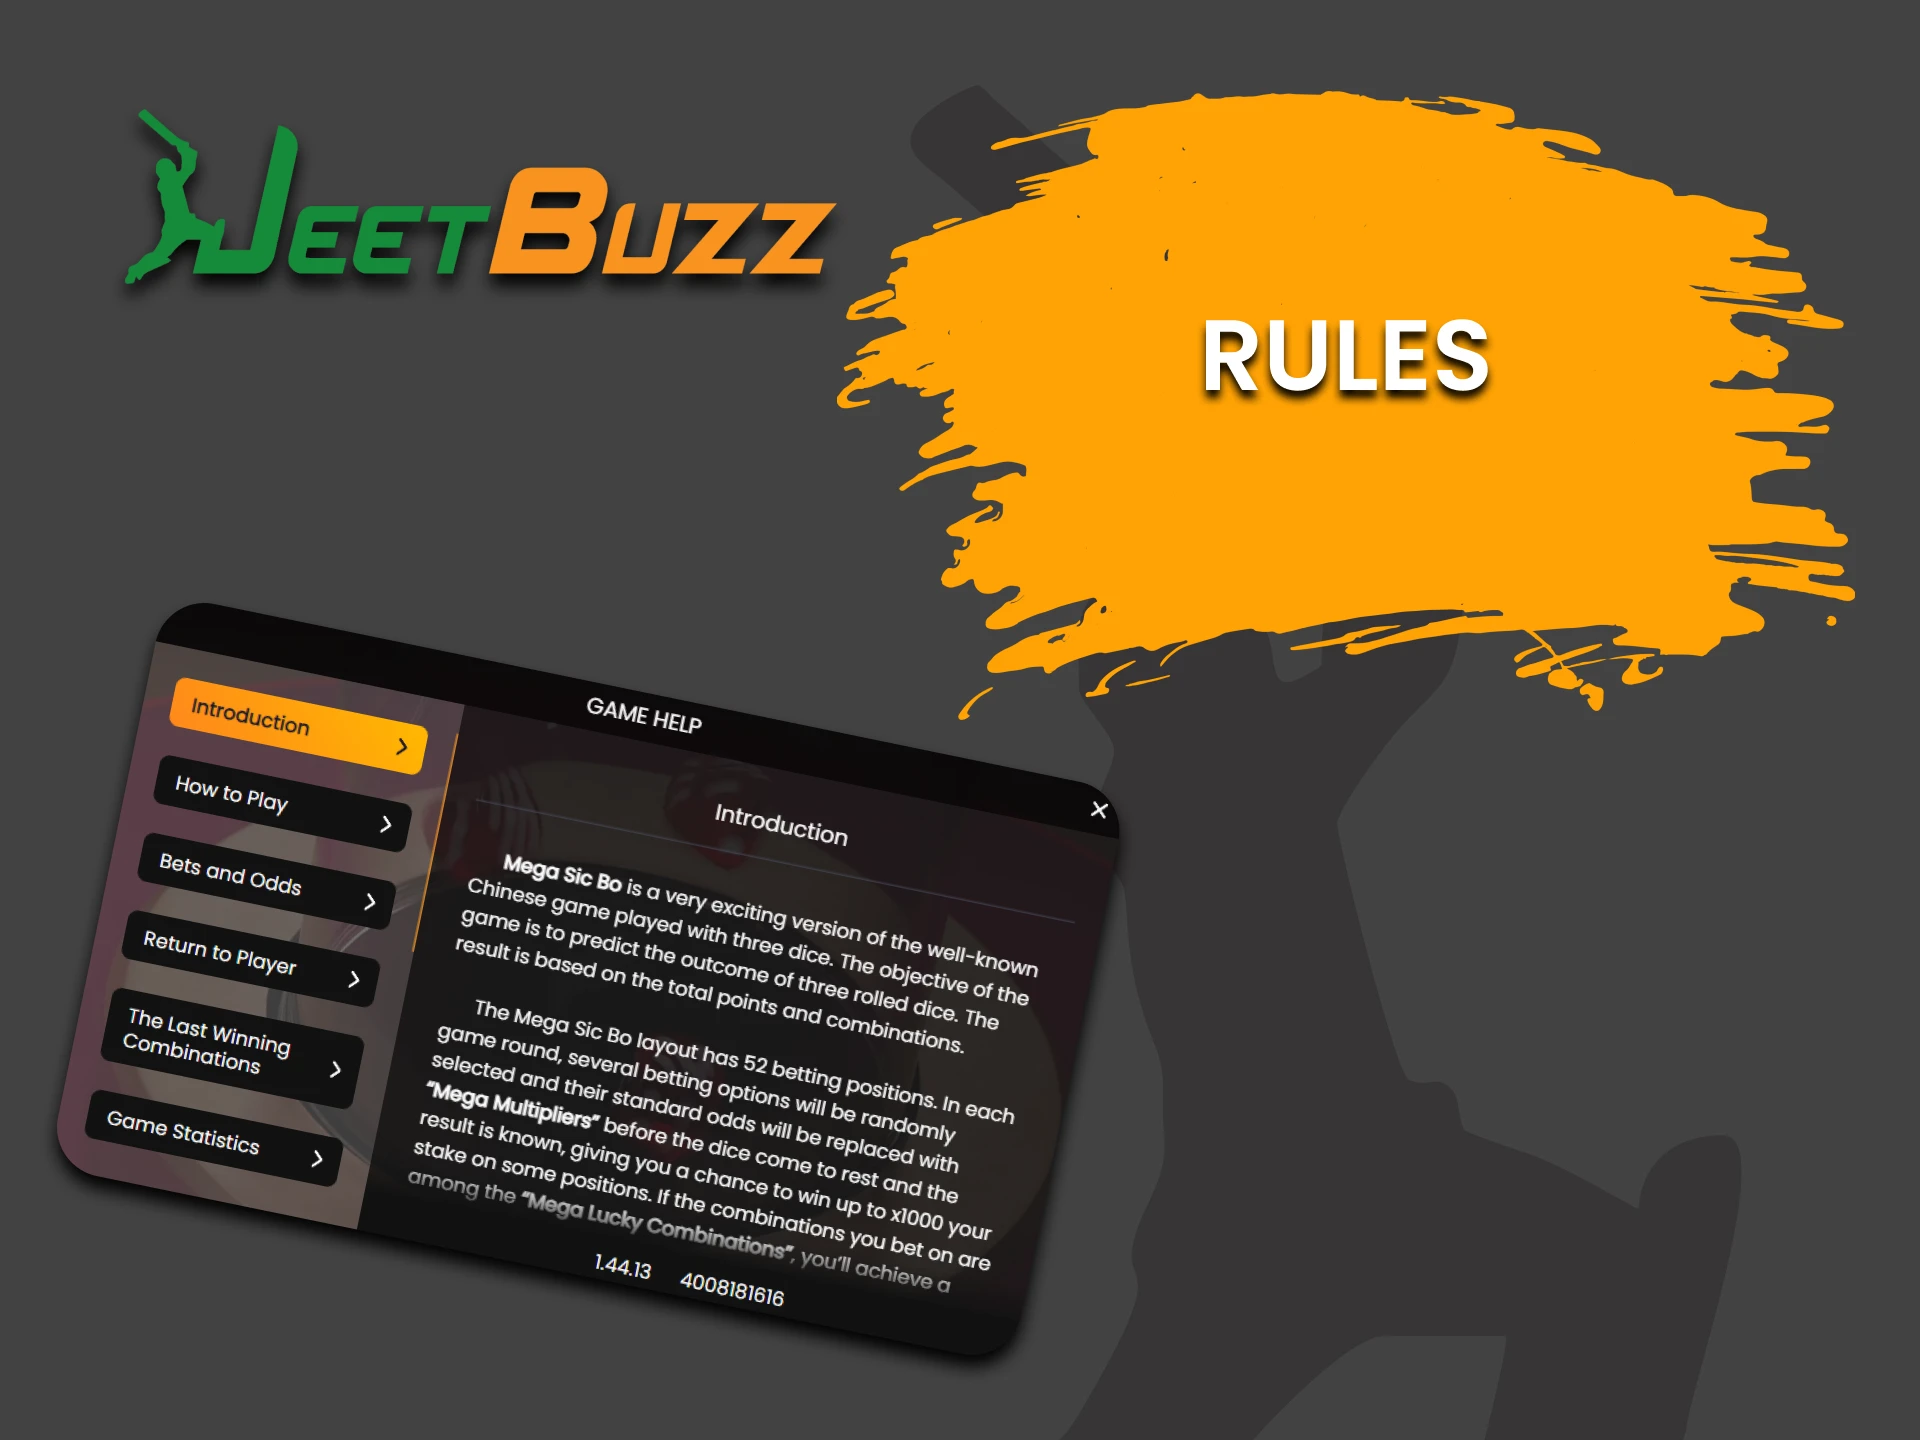 Learn the rules of Sic Bo on Jeetbuzz.